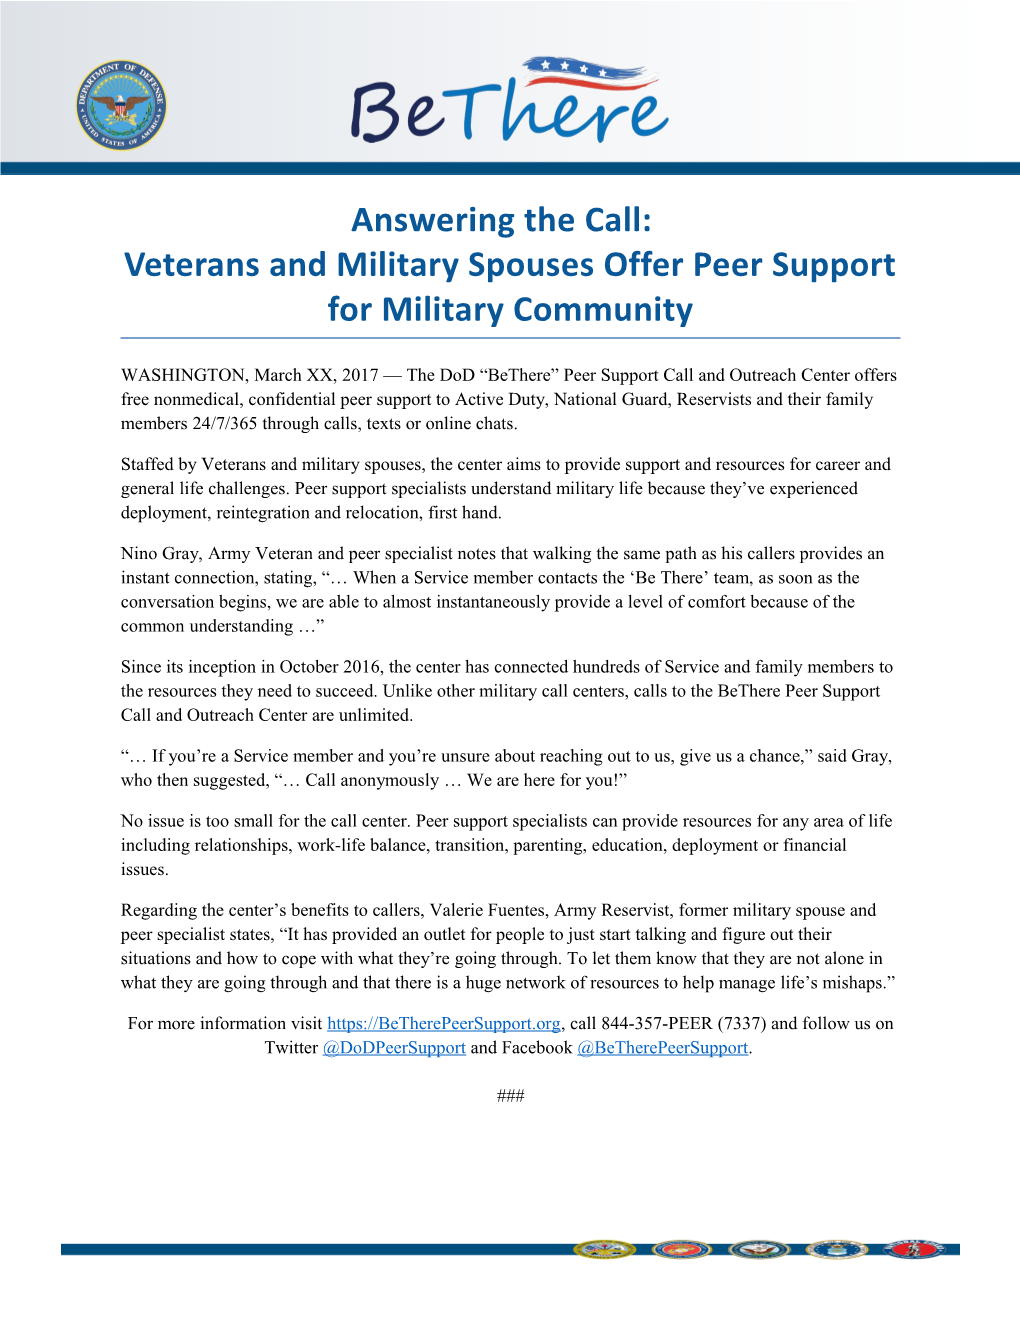 Answering the Call: Veterans and Military Spouses Offer Peer Support for Military Community